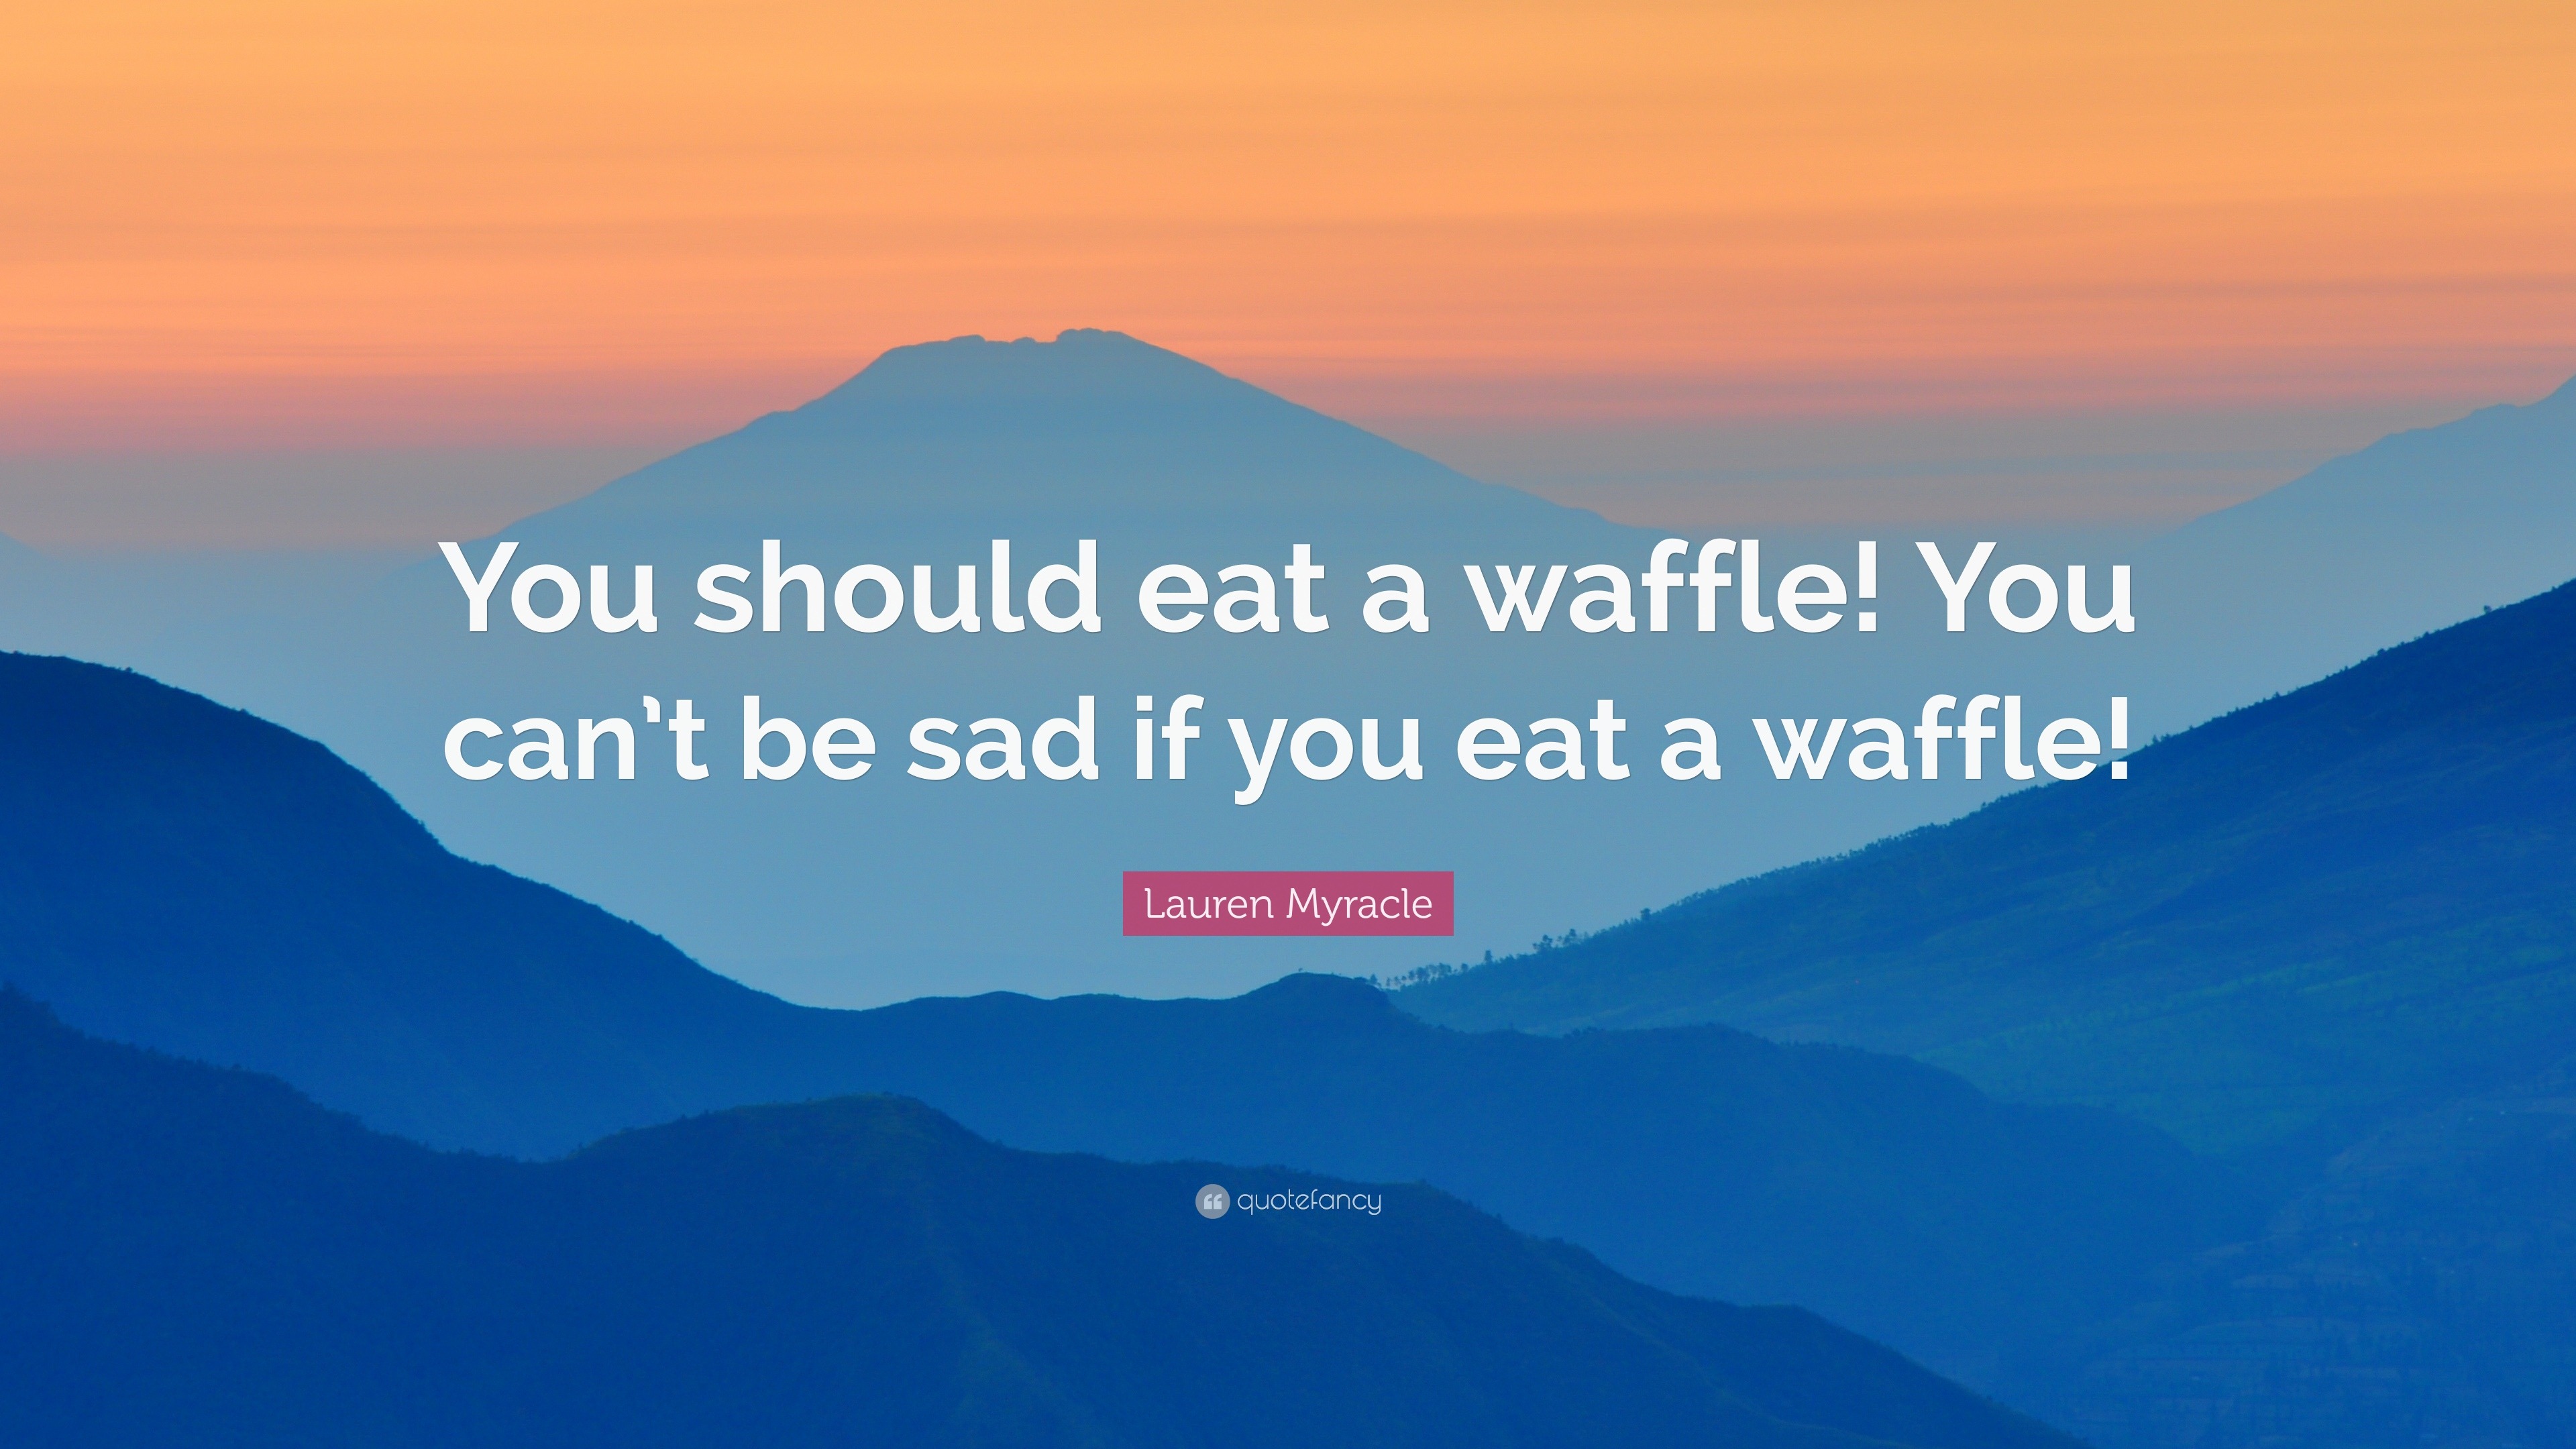 Lauren Myracle Quote: “You should eat a waffle! You can’t be sad if you ...